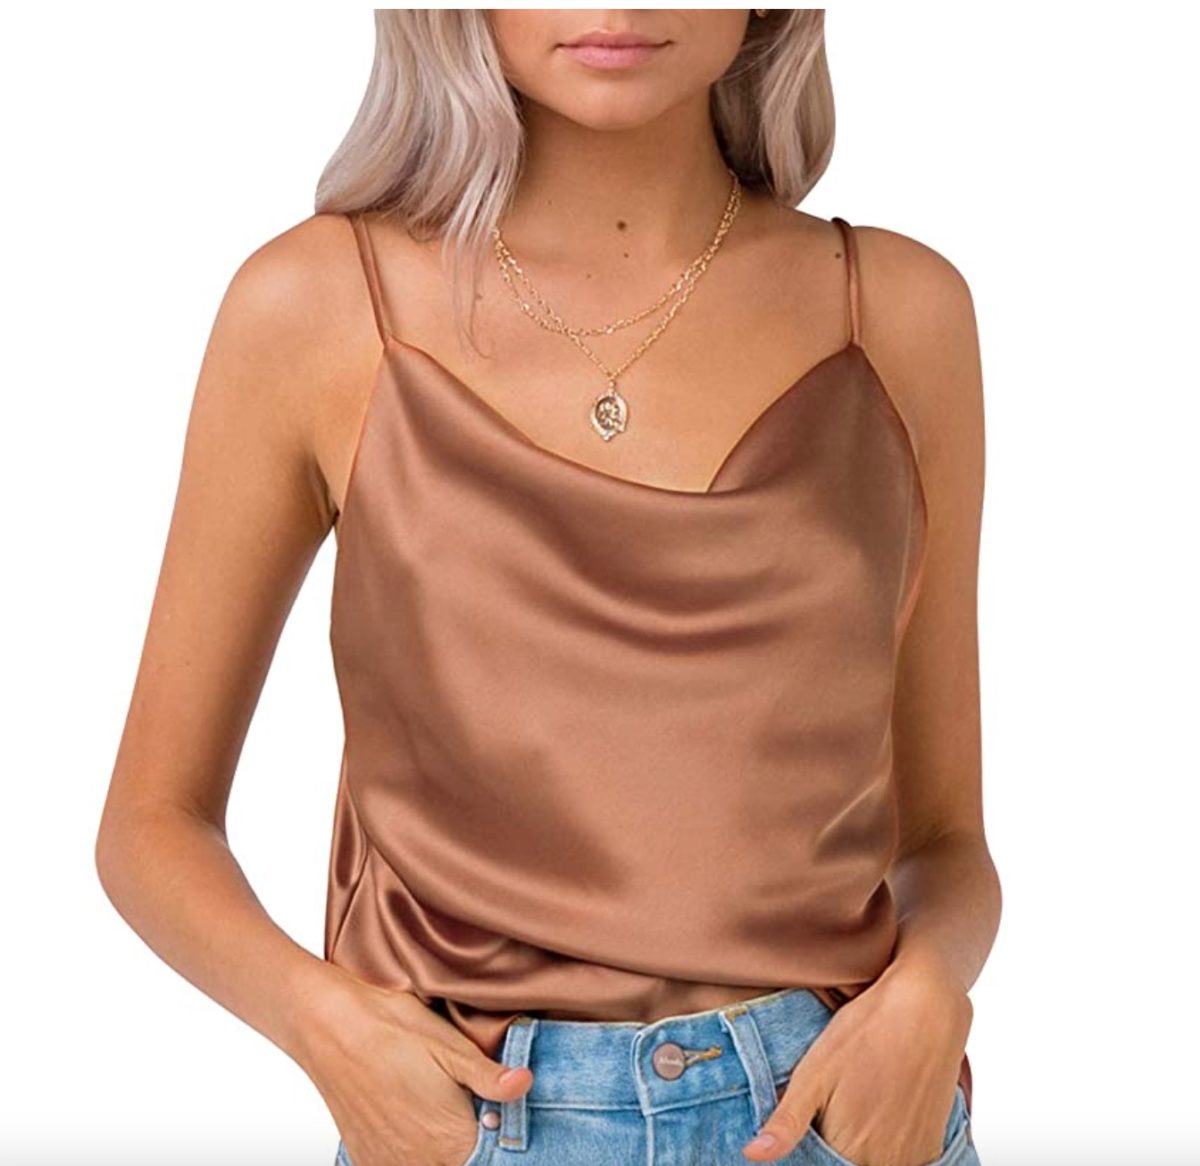 Recent and Cheap Amazon Fashion Finds That We Think You Will Love Too